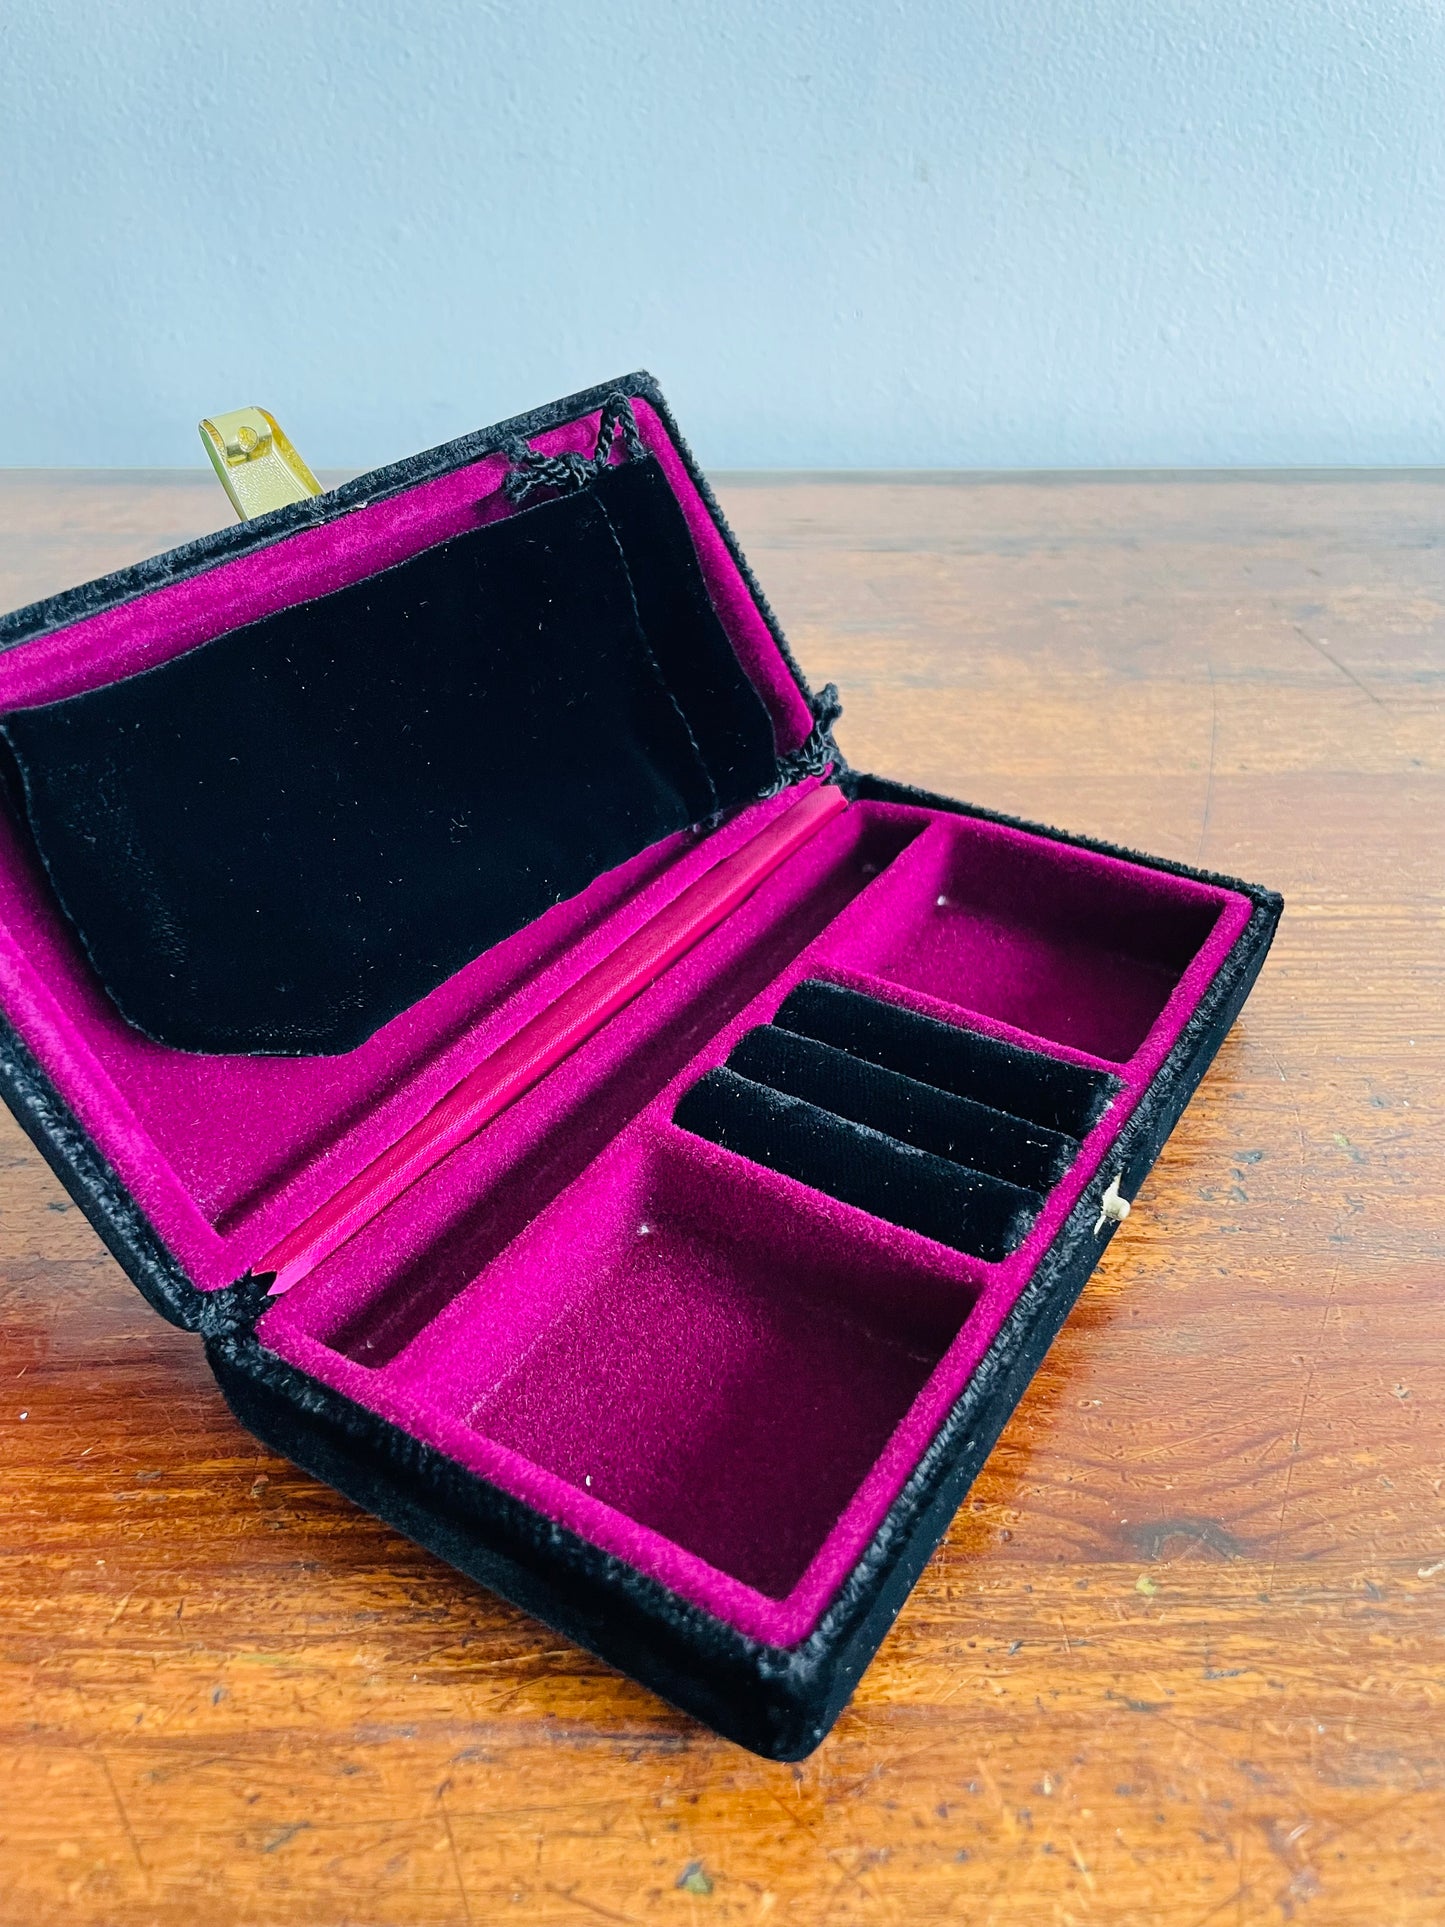 Black Crushed Velvet Travel Case for Jewellery with Brass Latch - Made in Germany